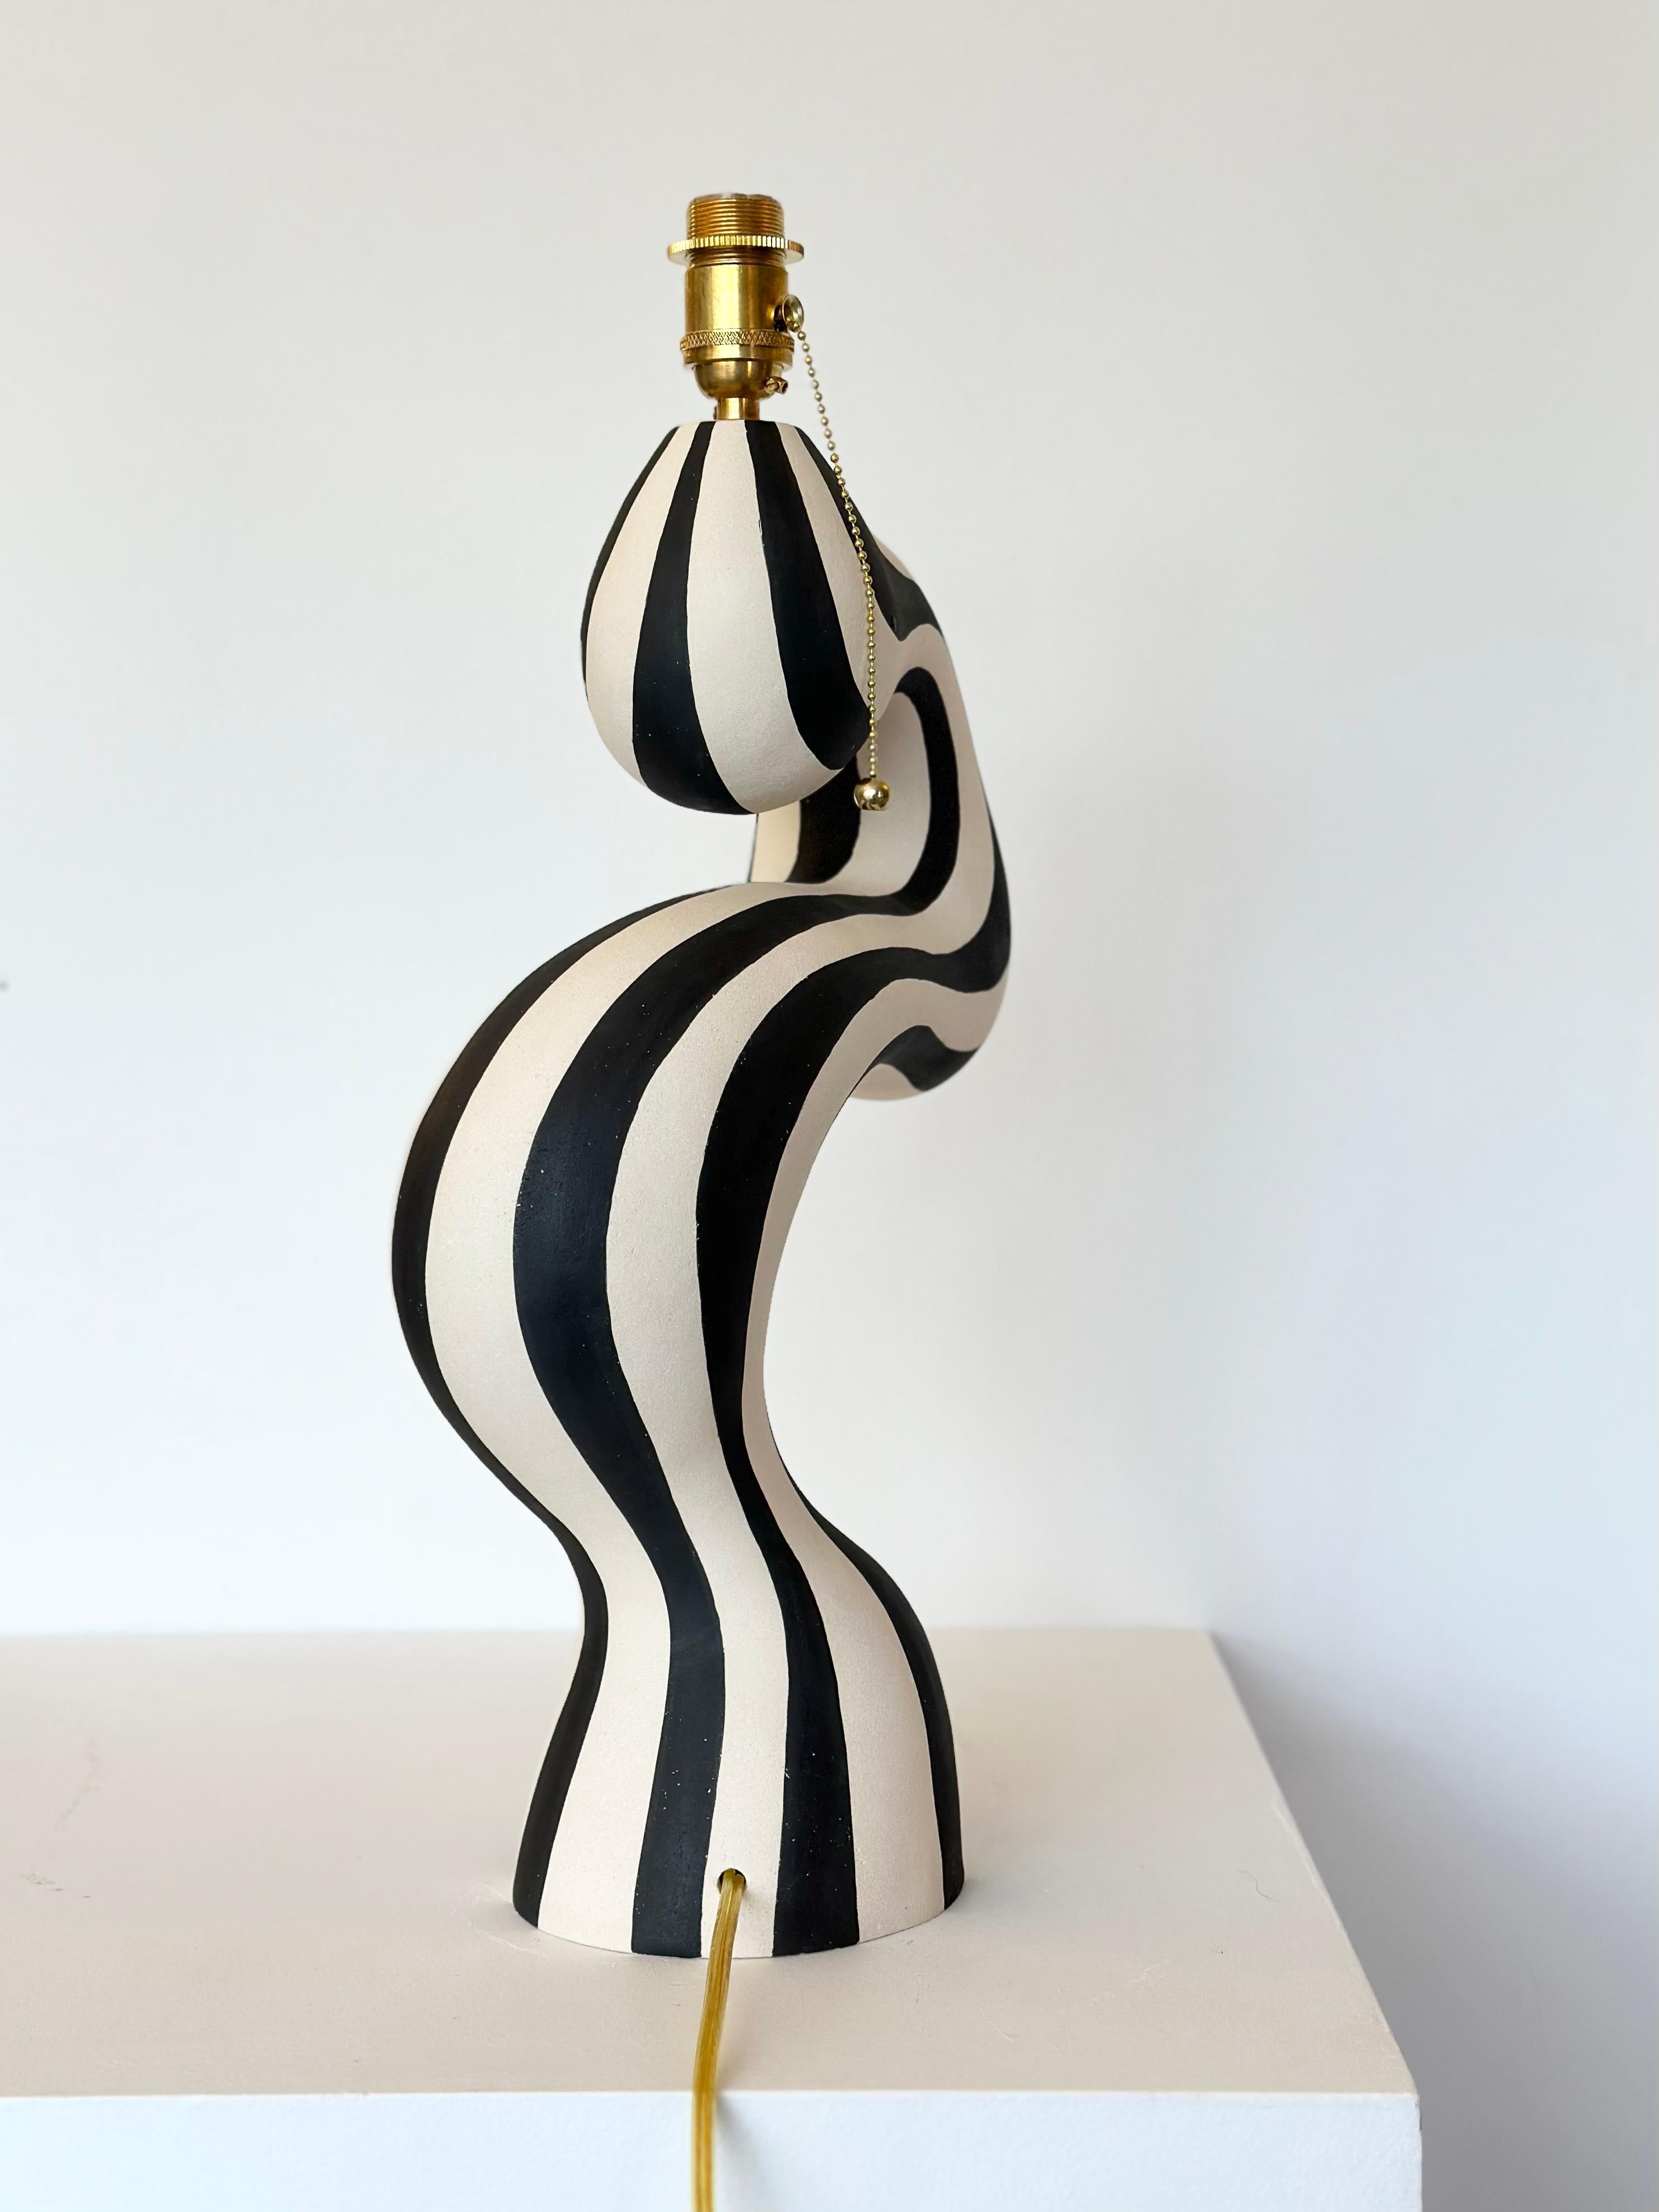 An art piece designed and handcrafted by ceramic artist Johanne Birkeland who works under the artist name Jossolini. The lamp base is hand built in white stoneware clay, and hand decorated with black matte glaze. 

The lamp comes with North American